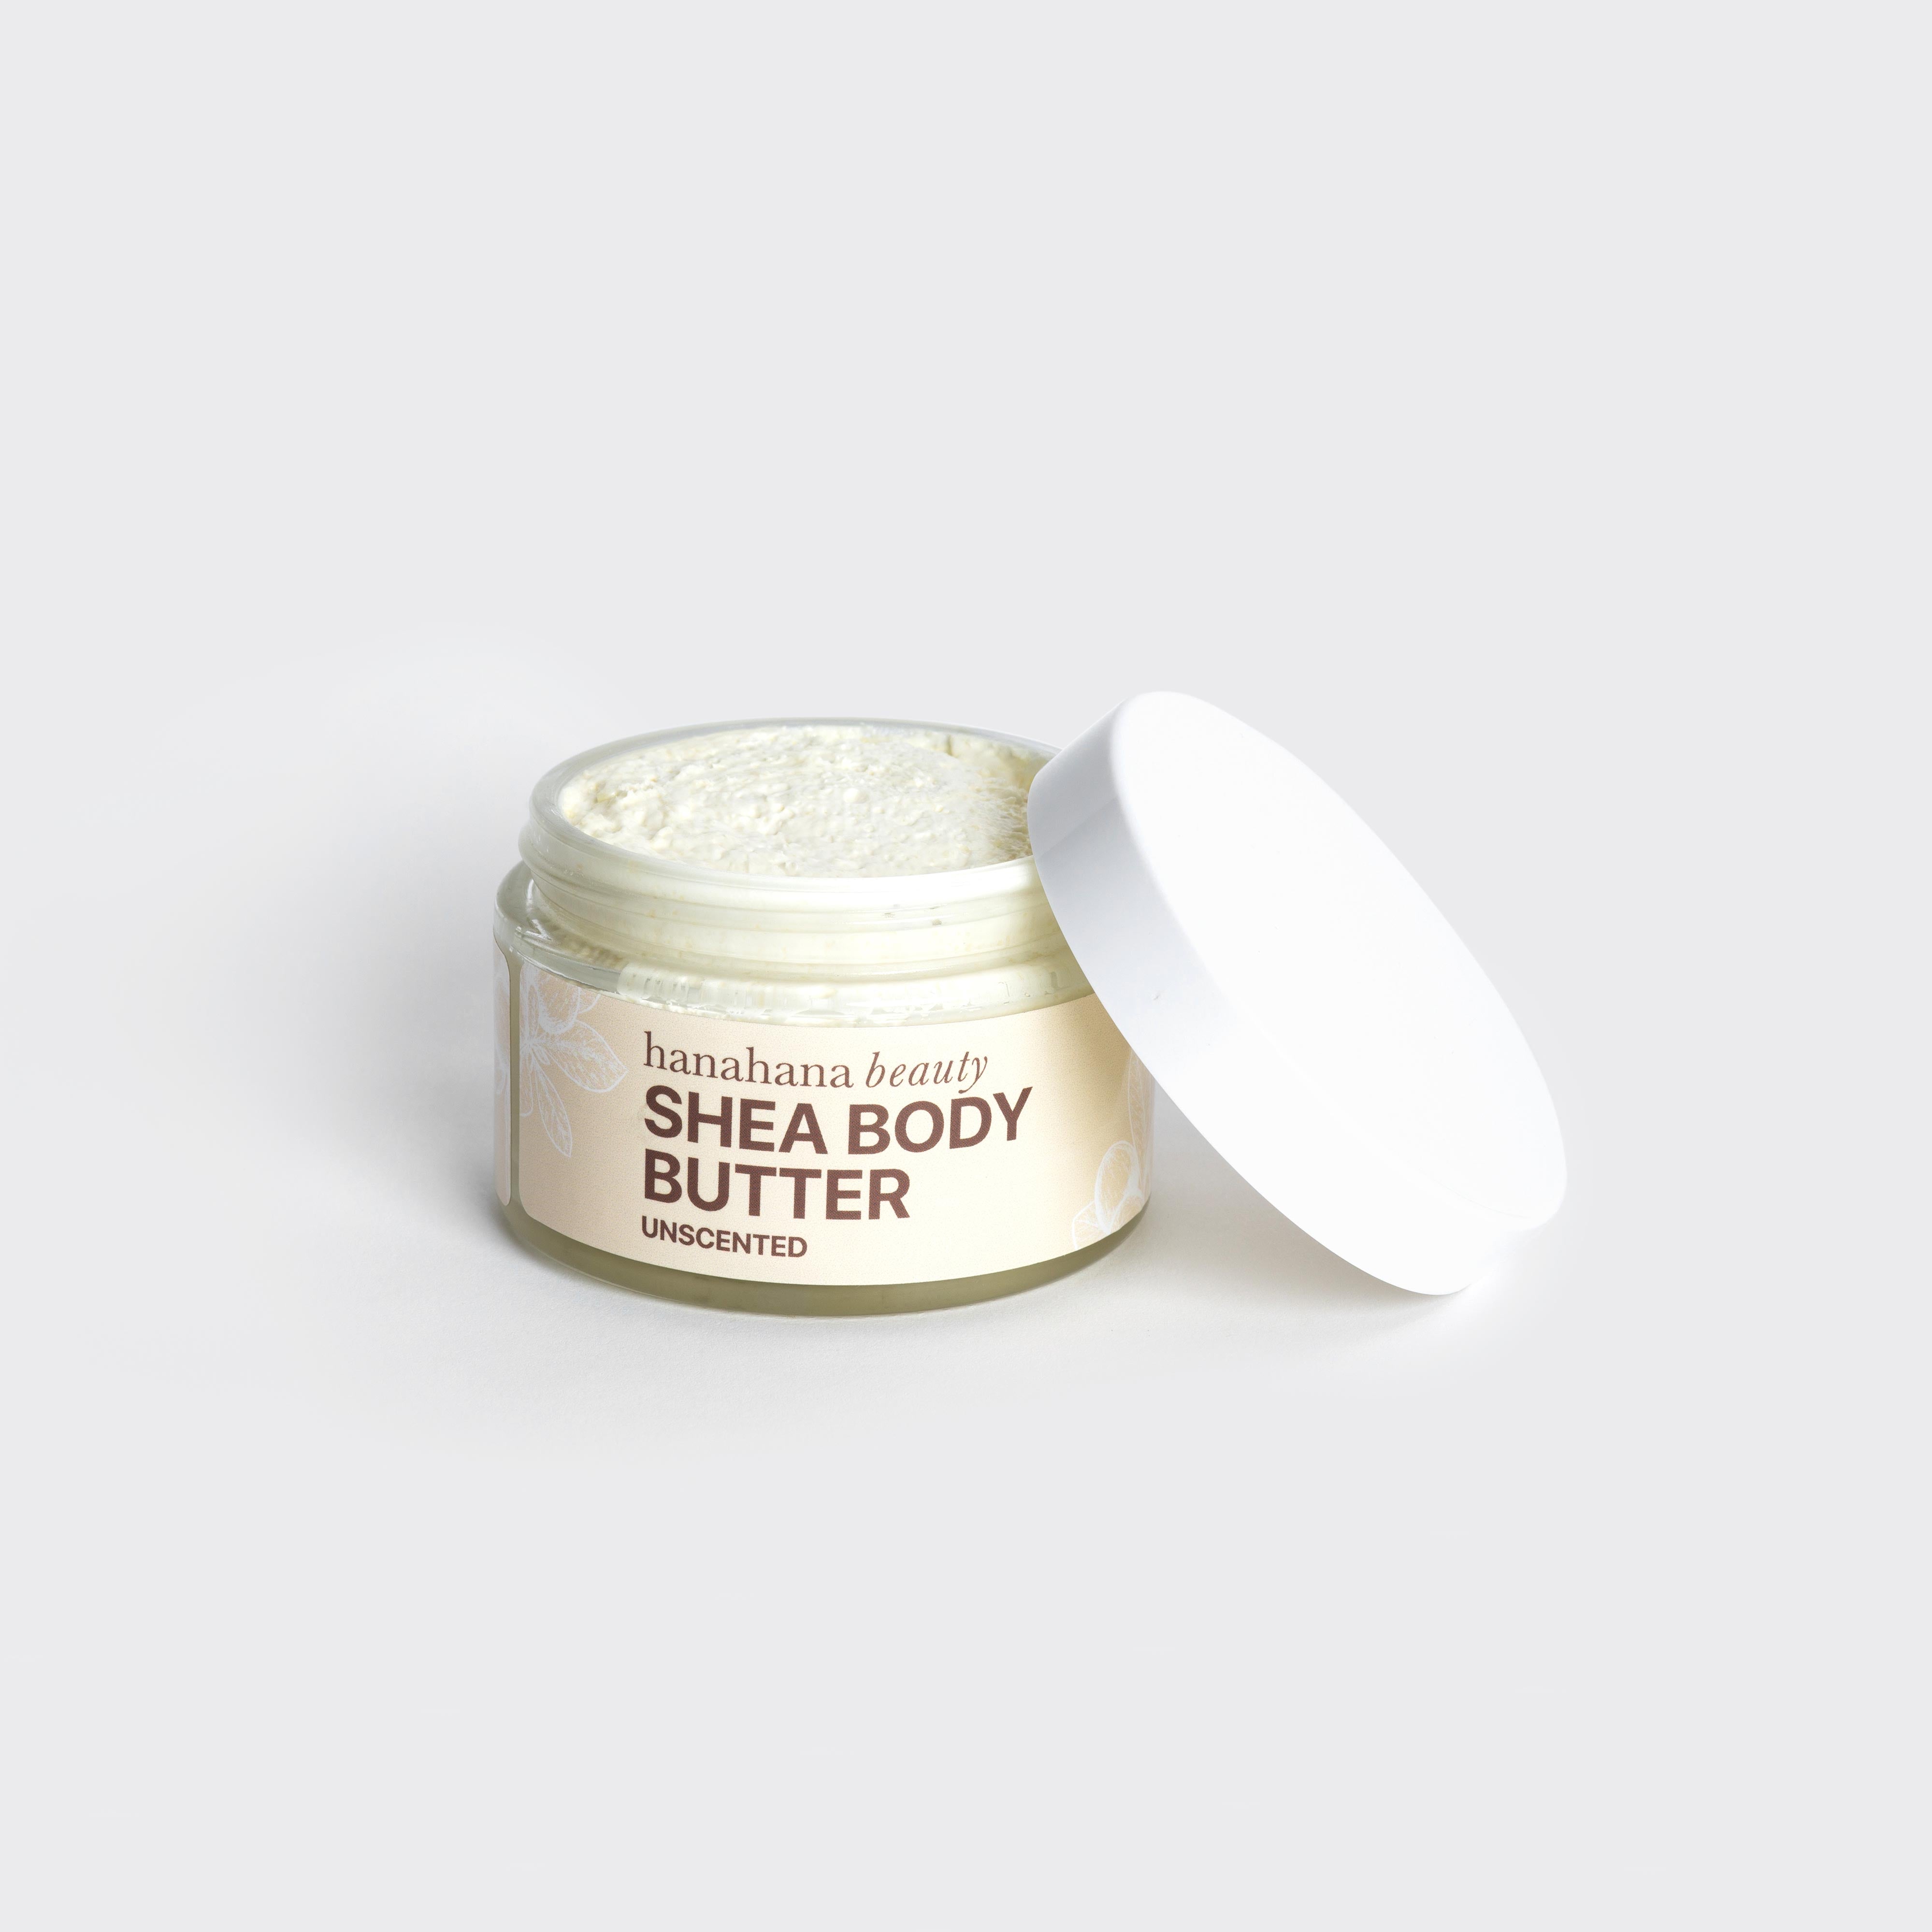 I. Introduction to the Use of Butter in Personal Care and Beauty Products